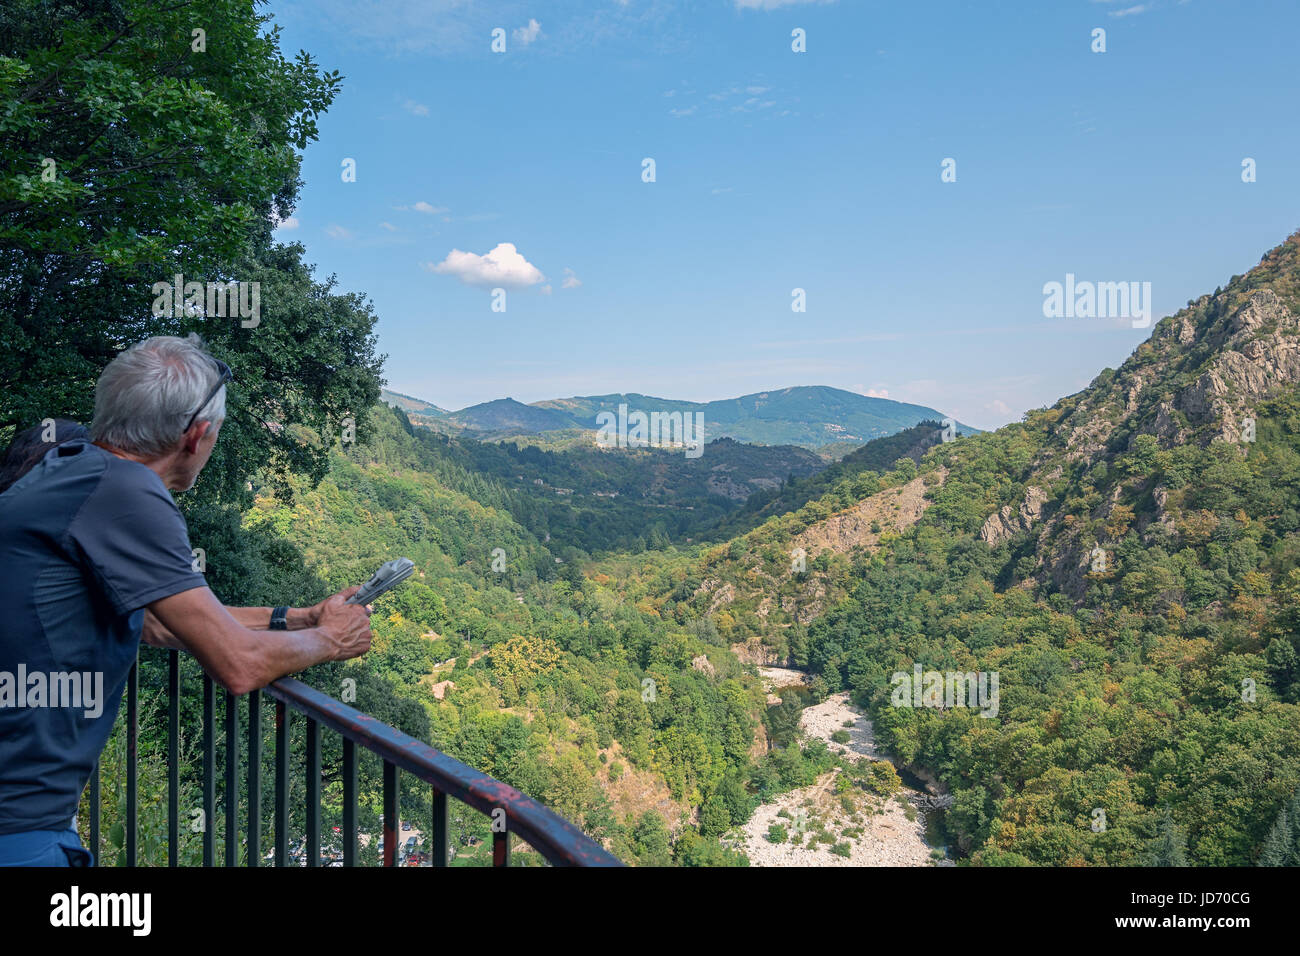 Thueyts, France, september 11,  2016:  Man with newspaper in hands enjoys the view over the valley where the river Ardeche flows Stock Photo